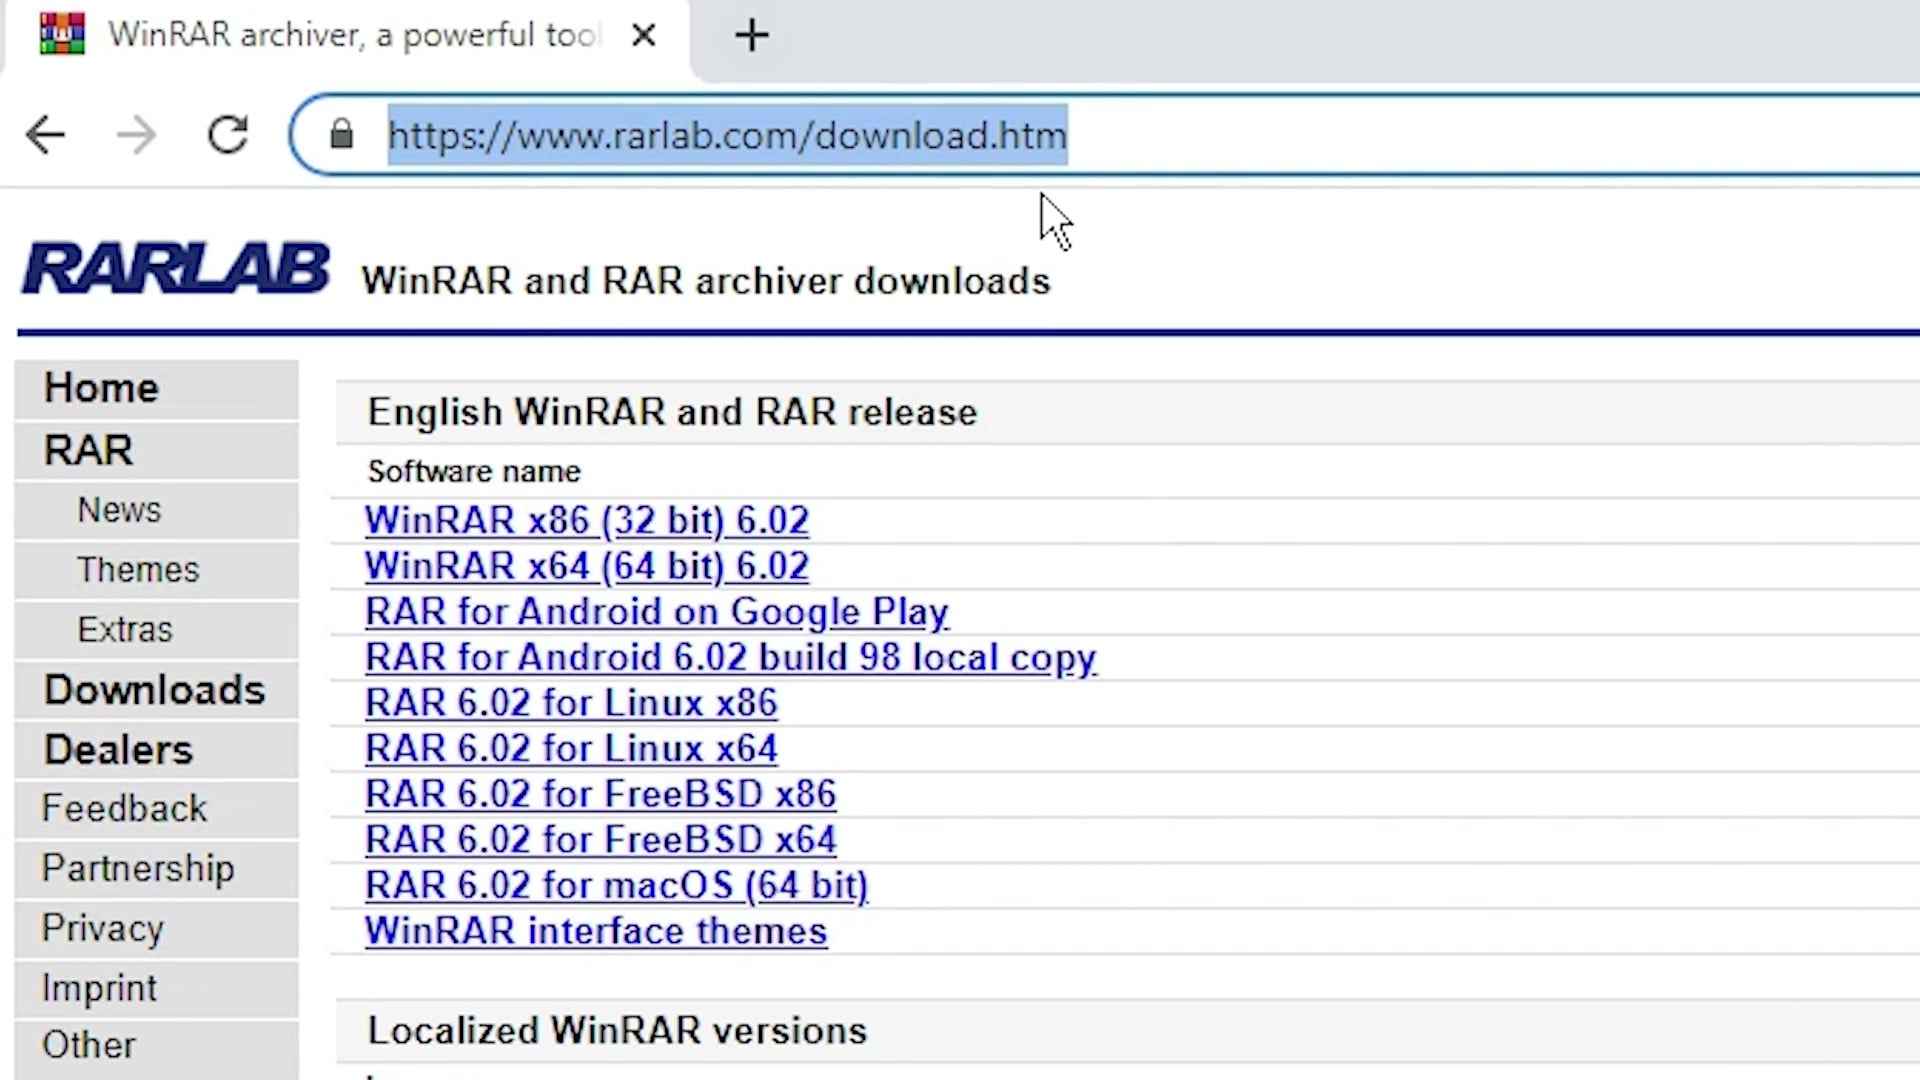 WinRAR and RAR archiver Software downloads